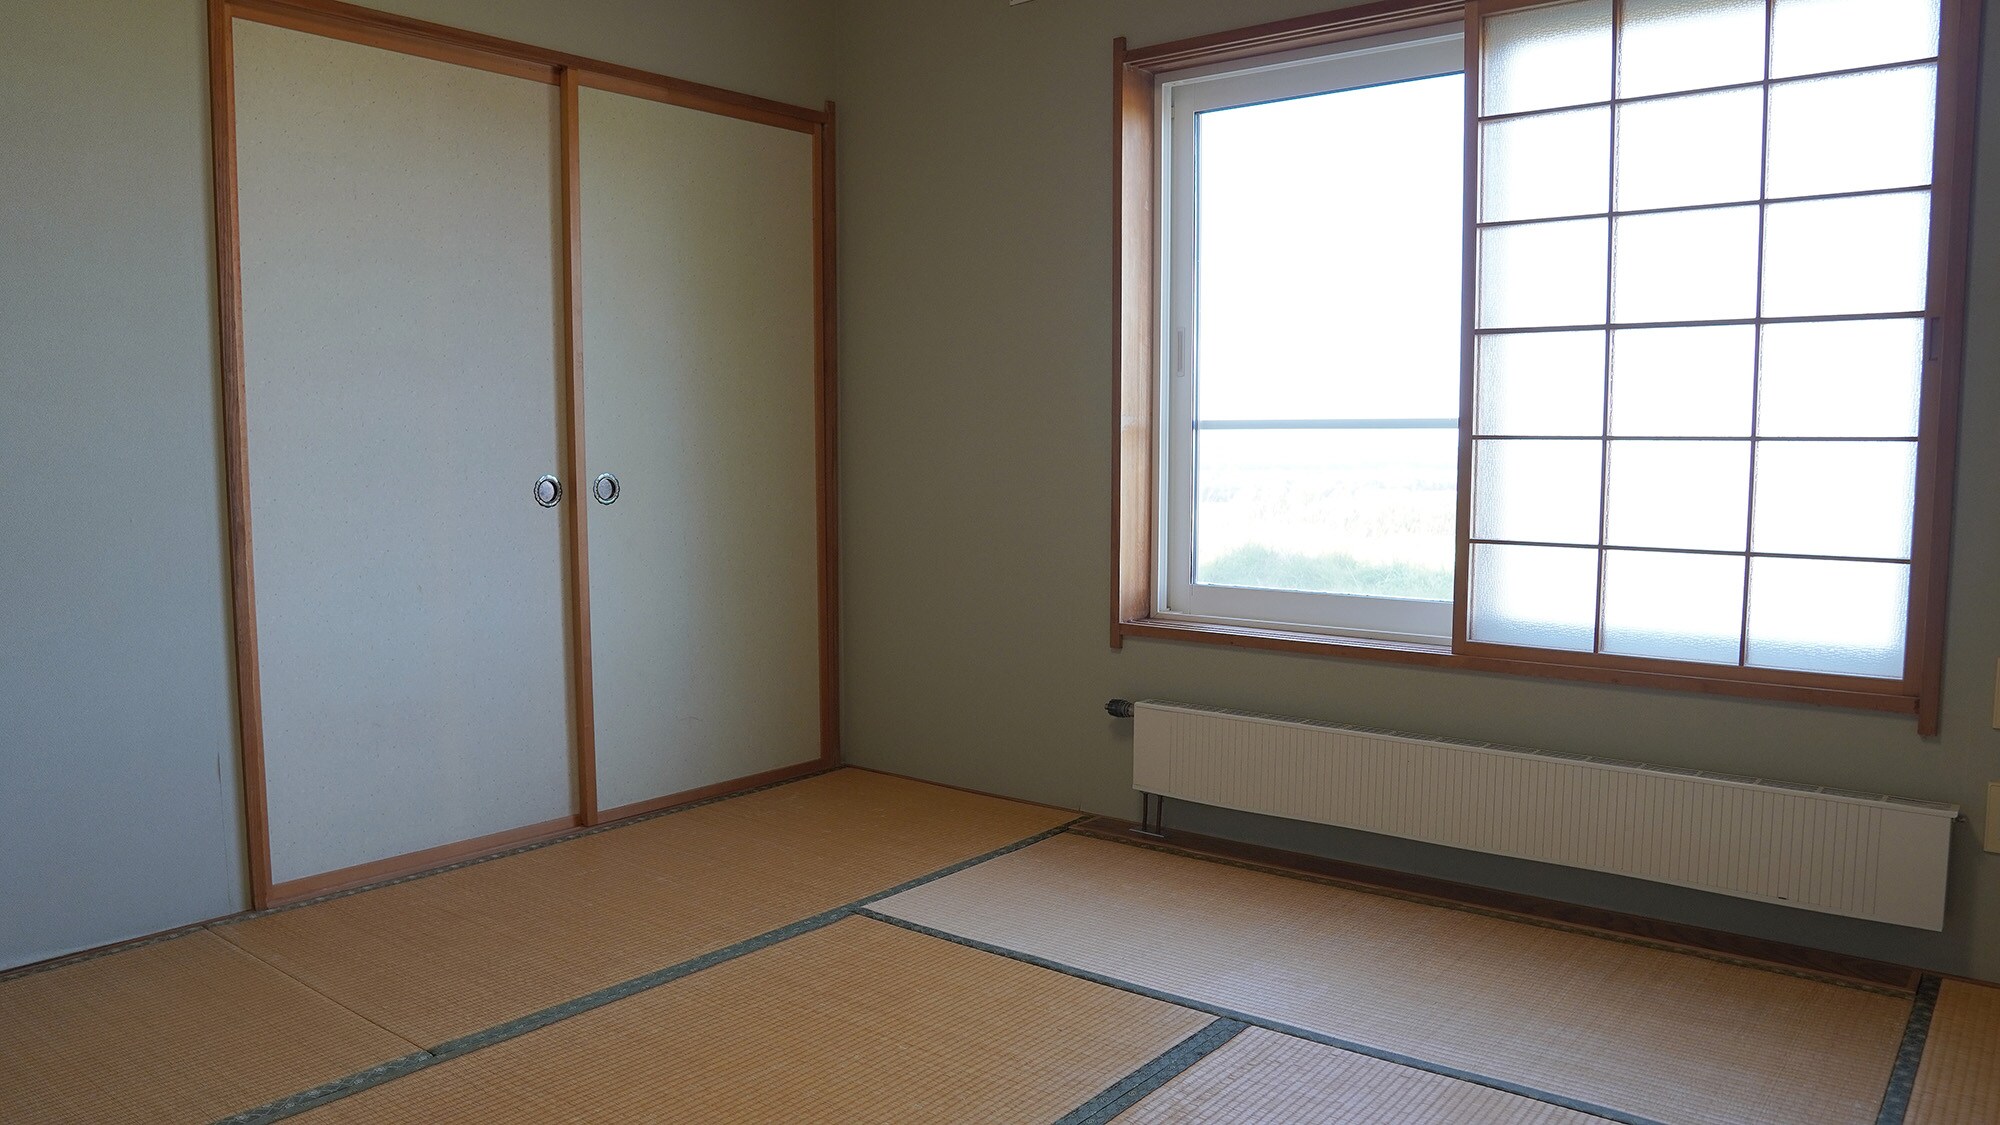 ・ Guest room (non-smoking / Japanese-style room 8 tatami mats)